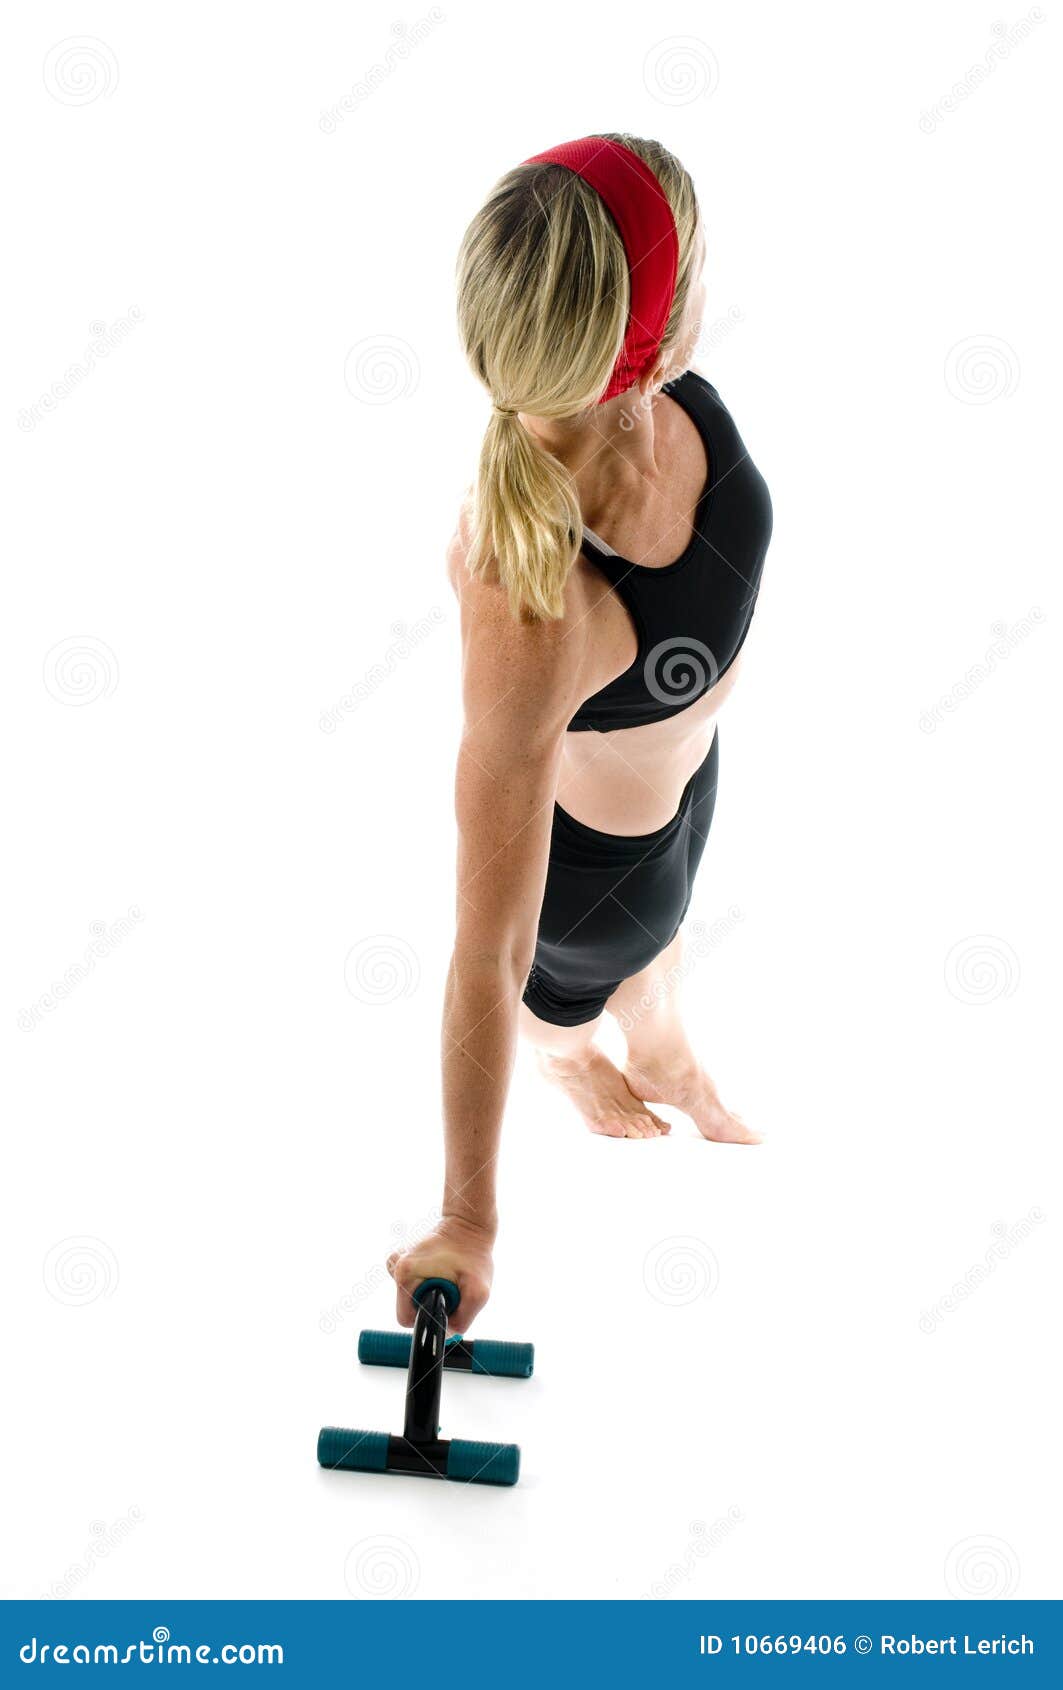 young man practicing low push up plank pose on stands, and women sitting in  half lotus pose Stock Photo by LightFieldStudios